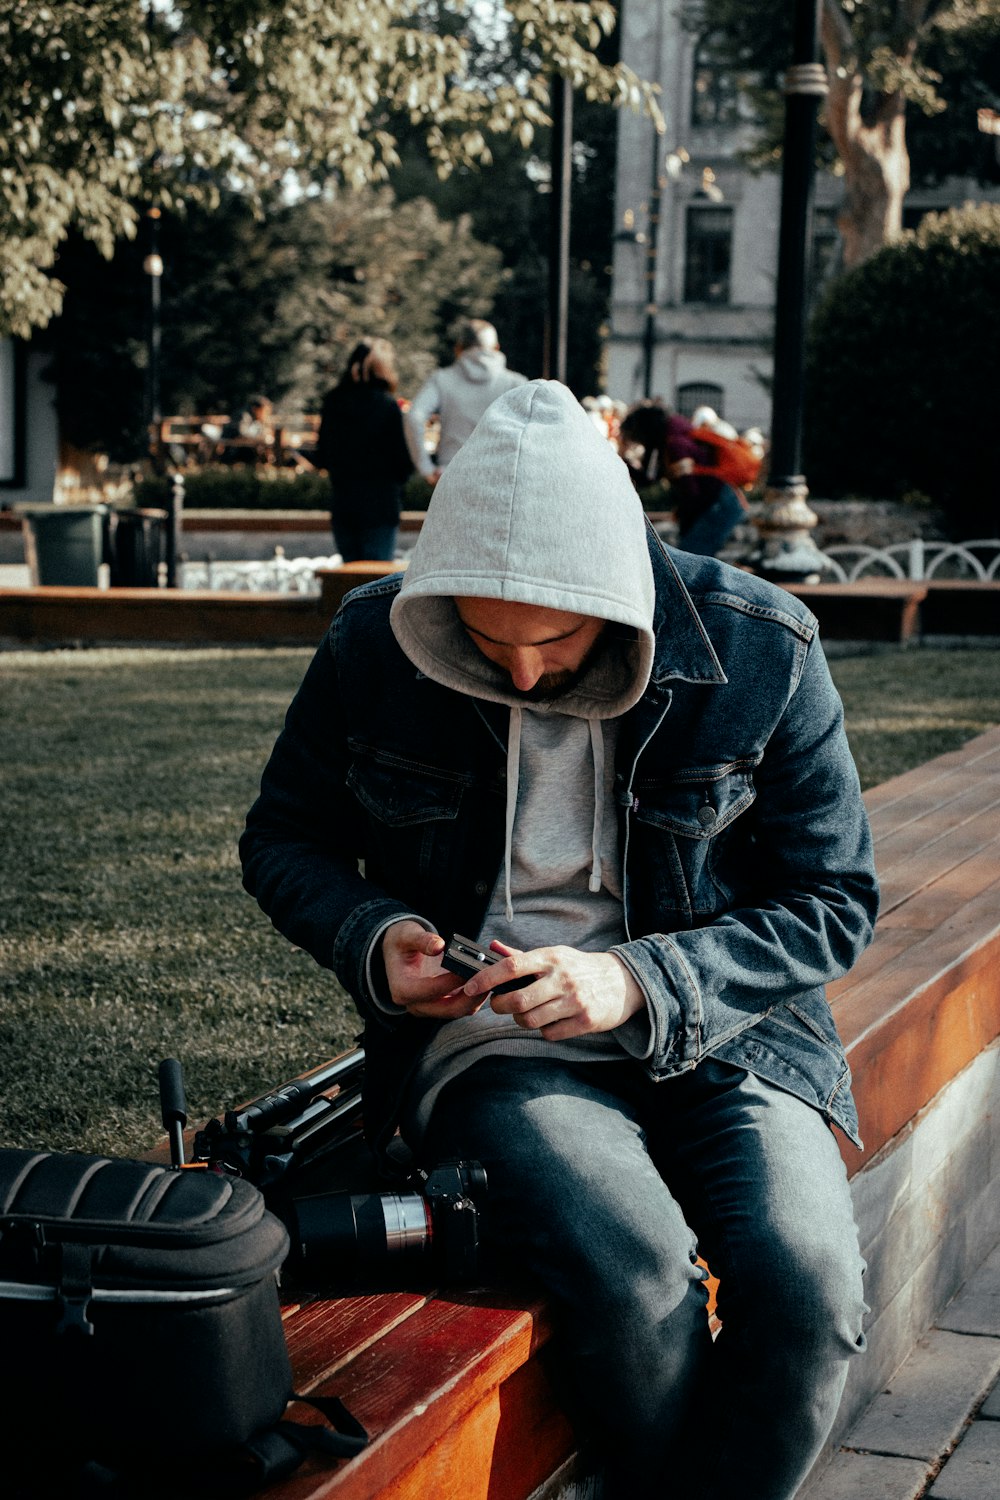 a person sitting on a bench looking at the phone